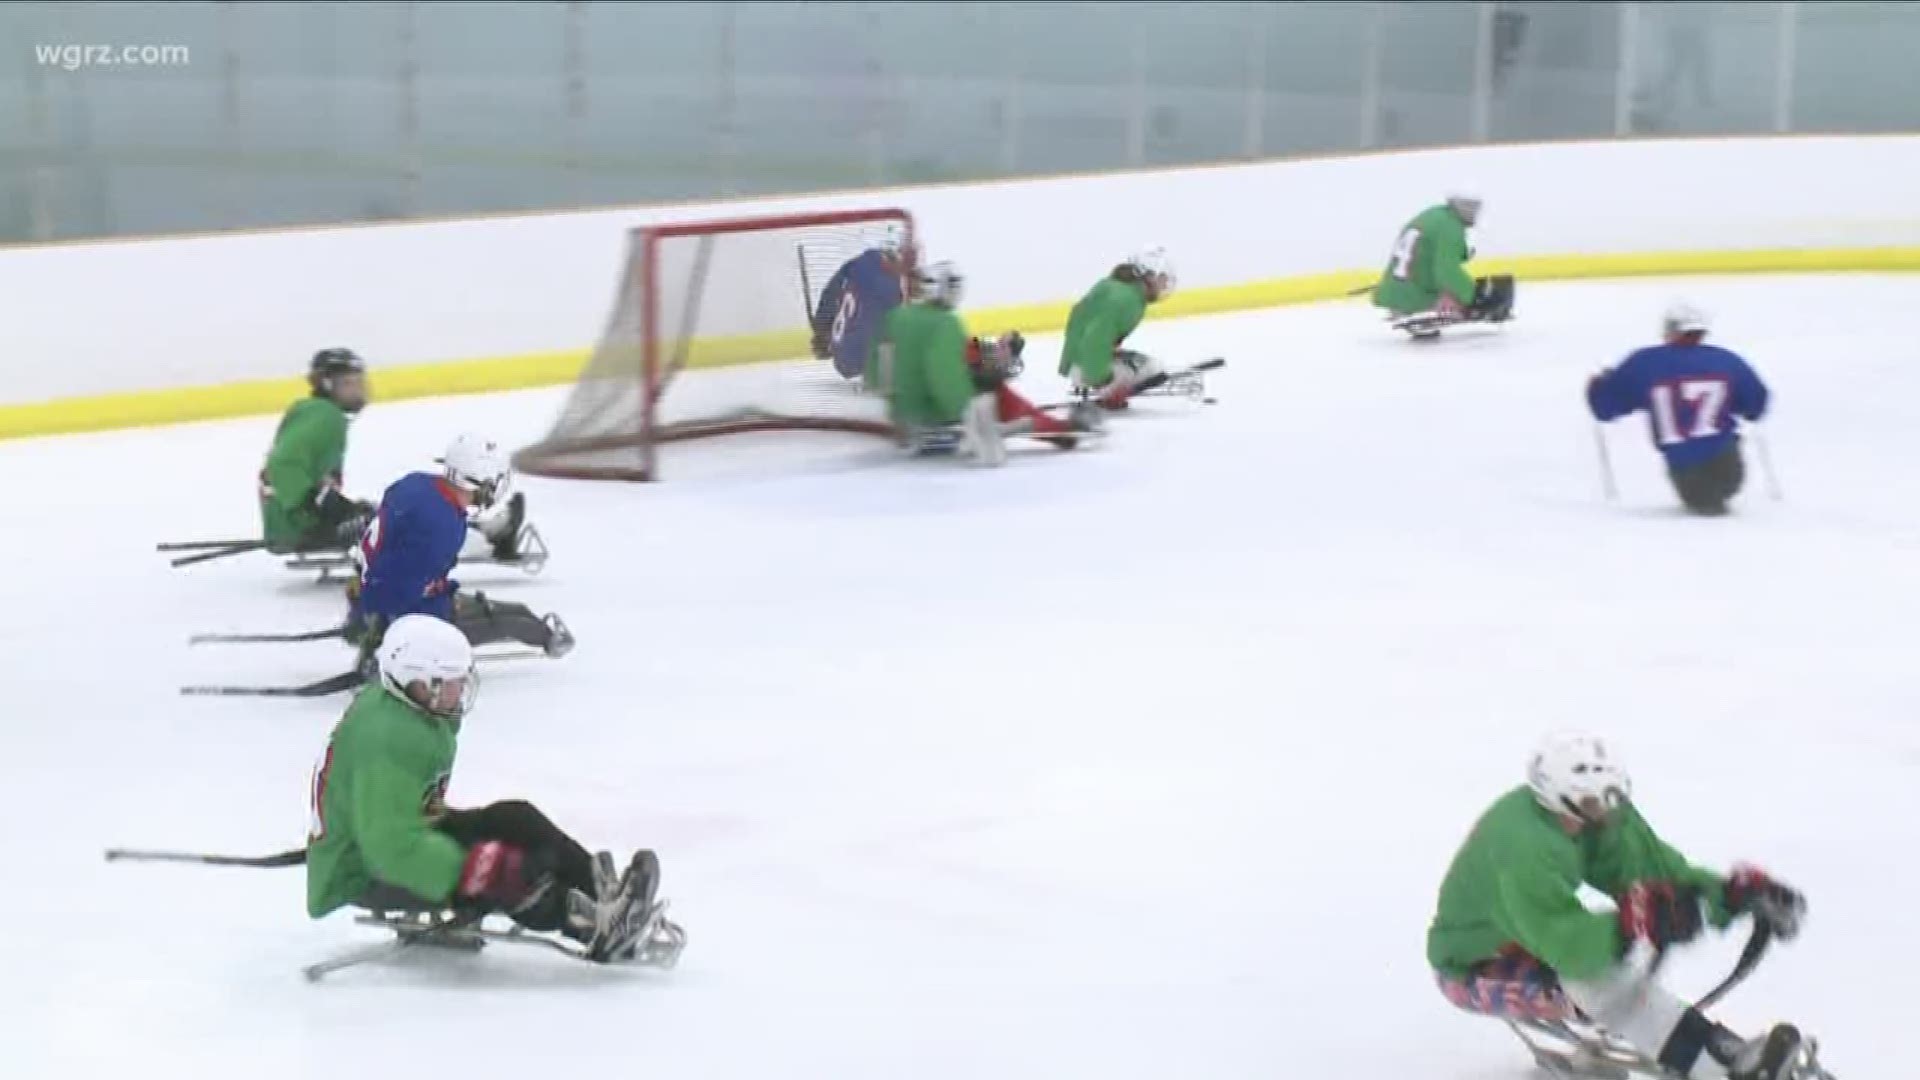 Look no further than the town of Amherst, where the USA National Sled Hockey team is reloading with local and national talent; all the while, the town continues conversation over a new, fully accessible hotel for future athletes